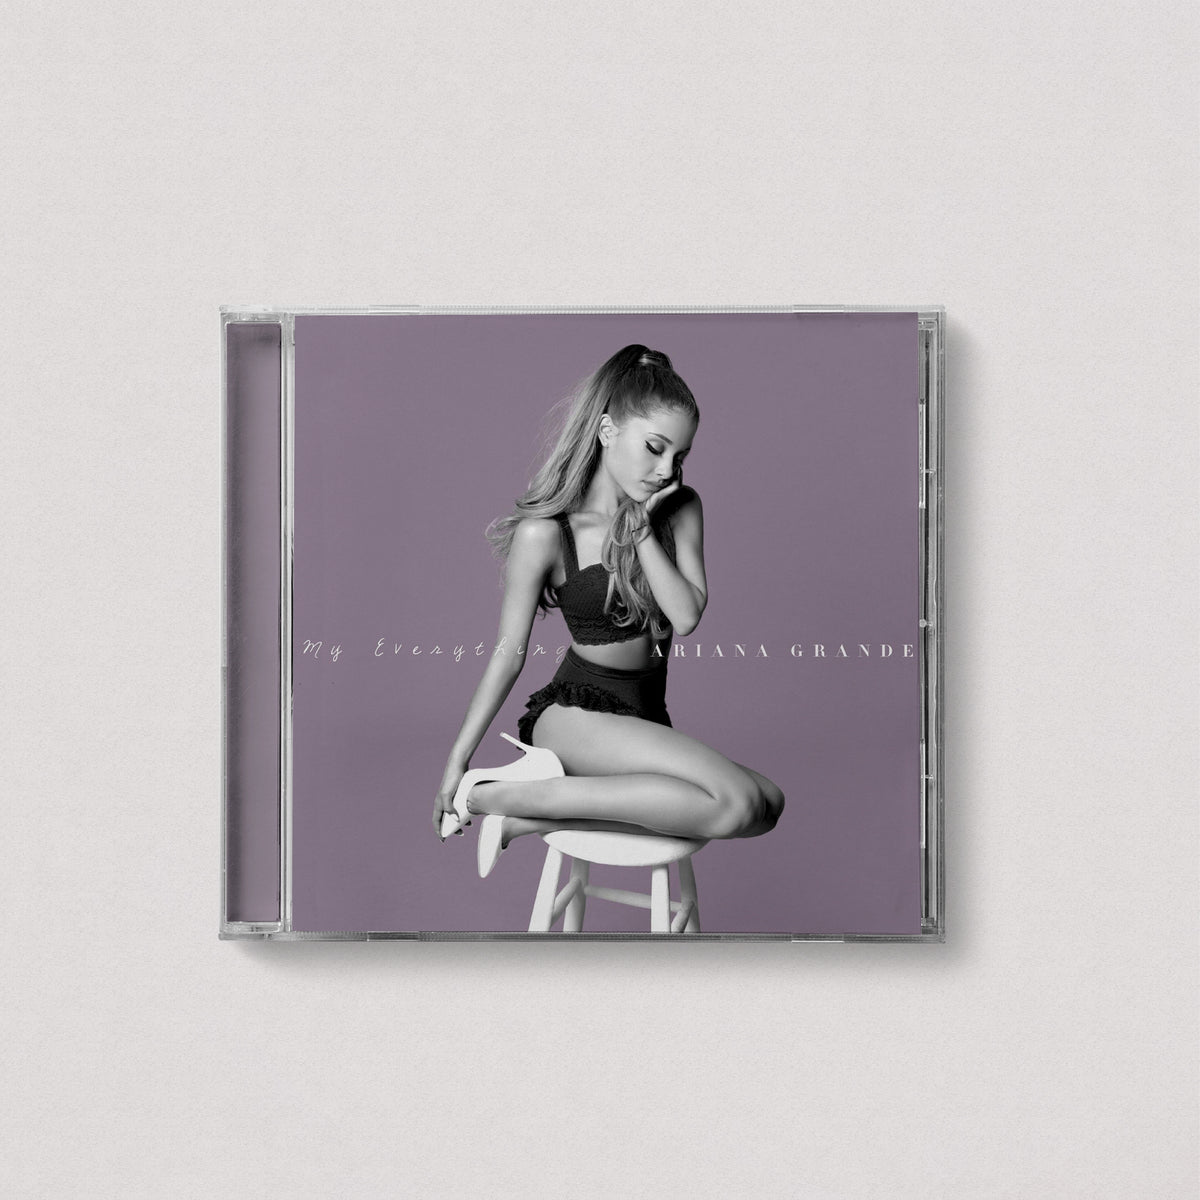 Ariana Grande - My Everything (Deluxe Edition, CD)